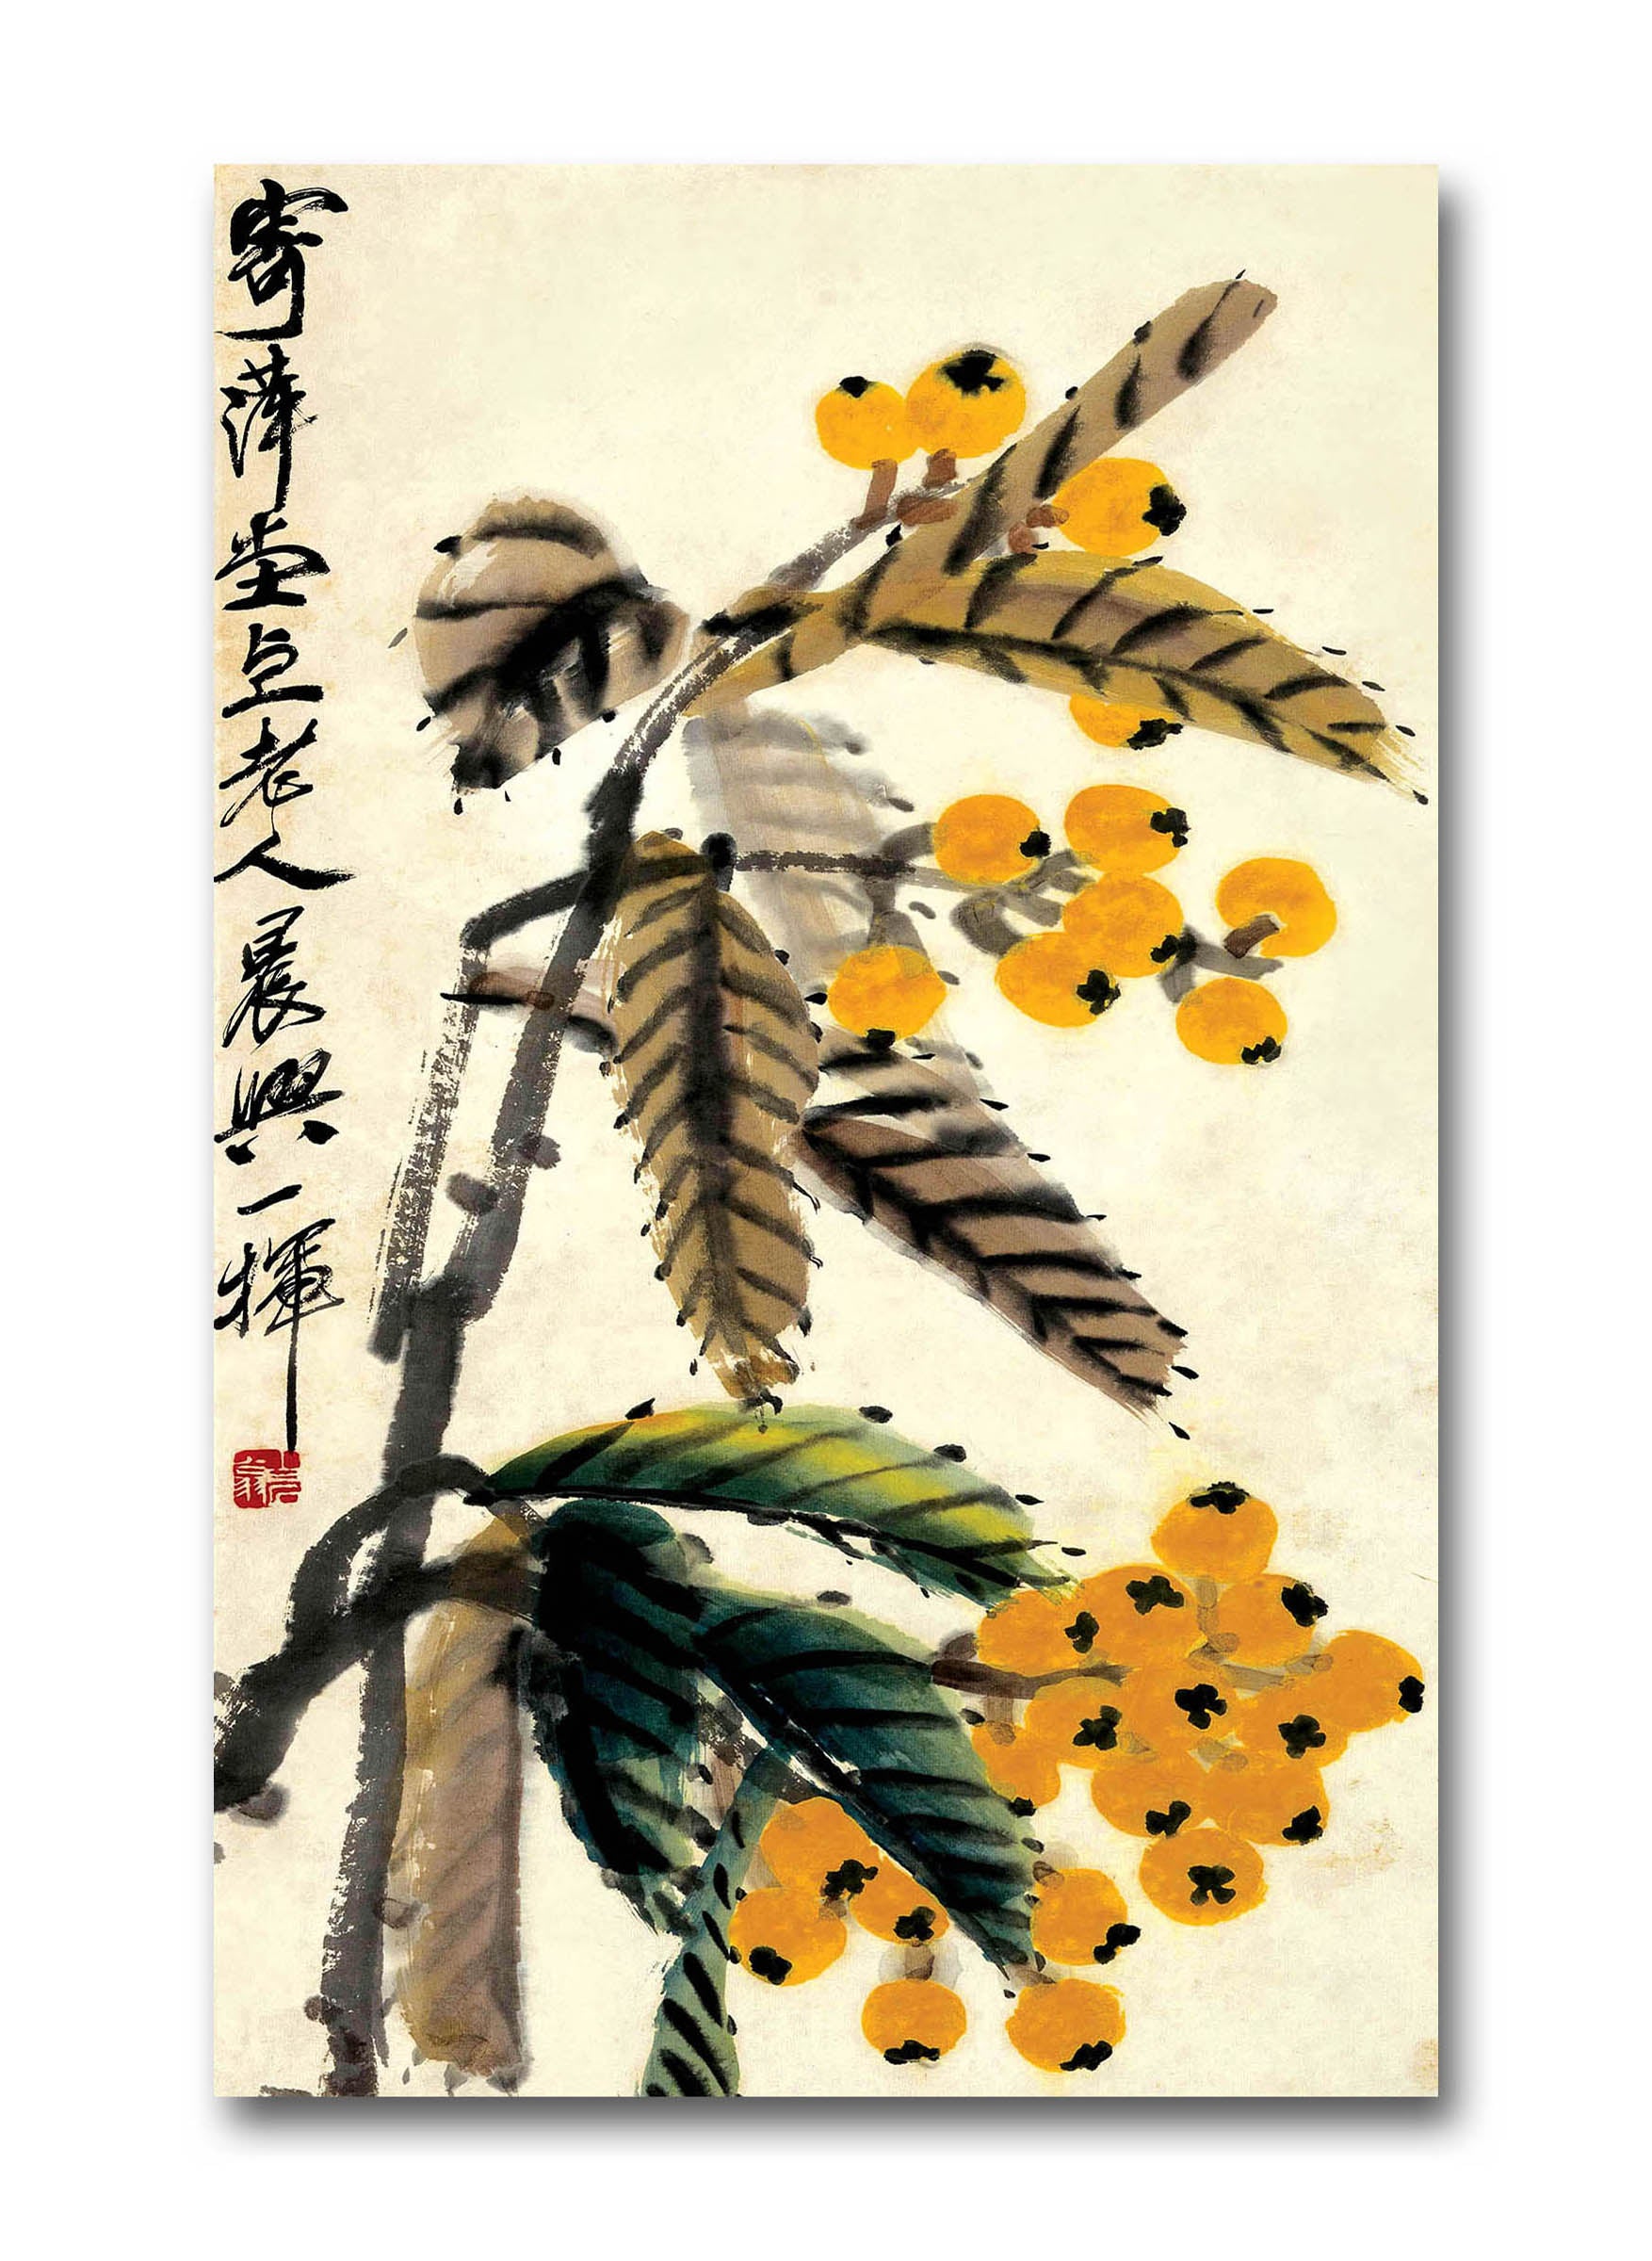 Japanese Art The evergreen tree - Unframed Canvas Painting